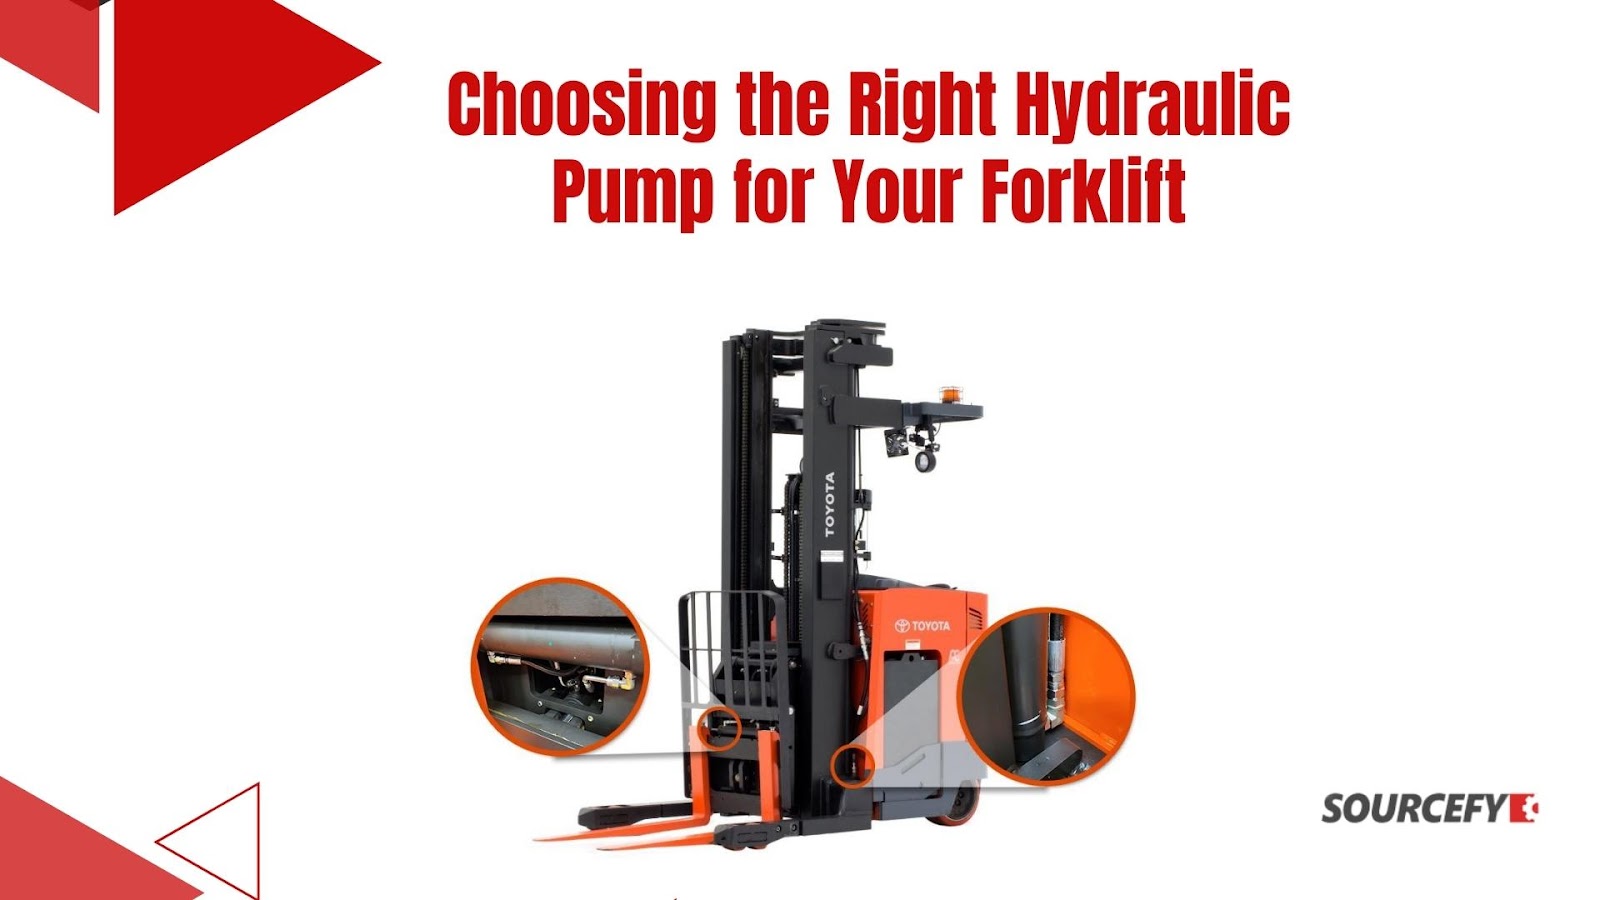 Choosing the Right Hydraulic Pump for Your Forklift